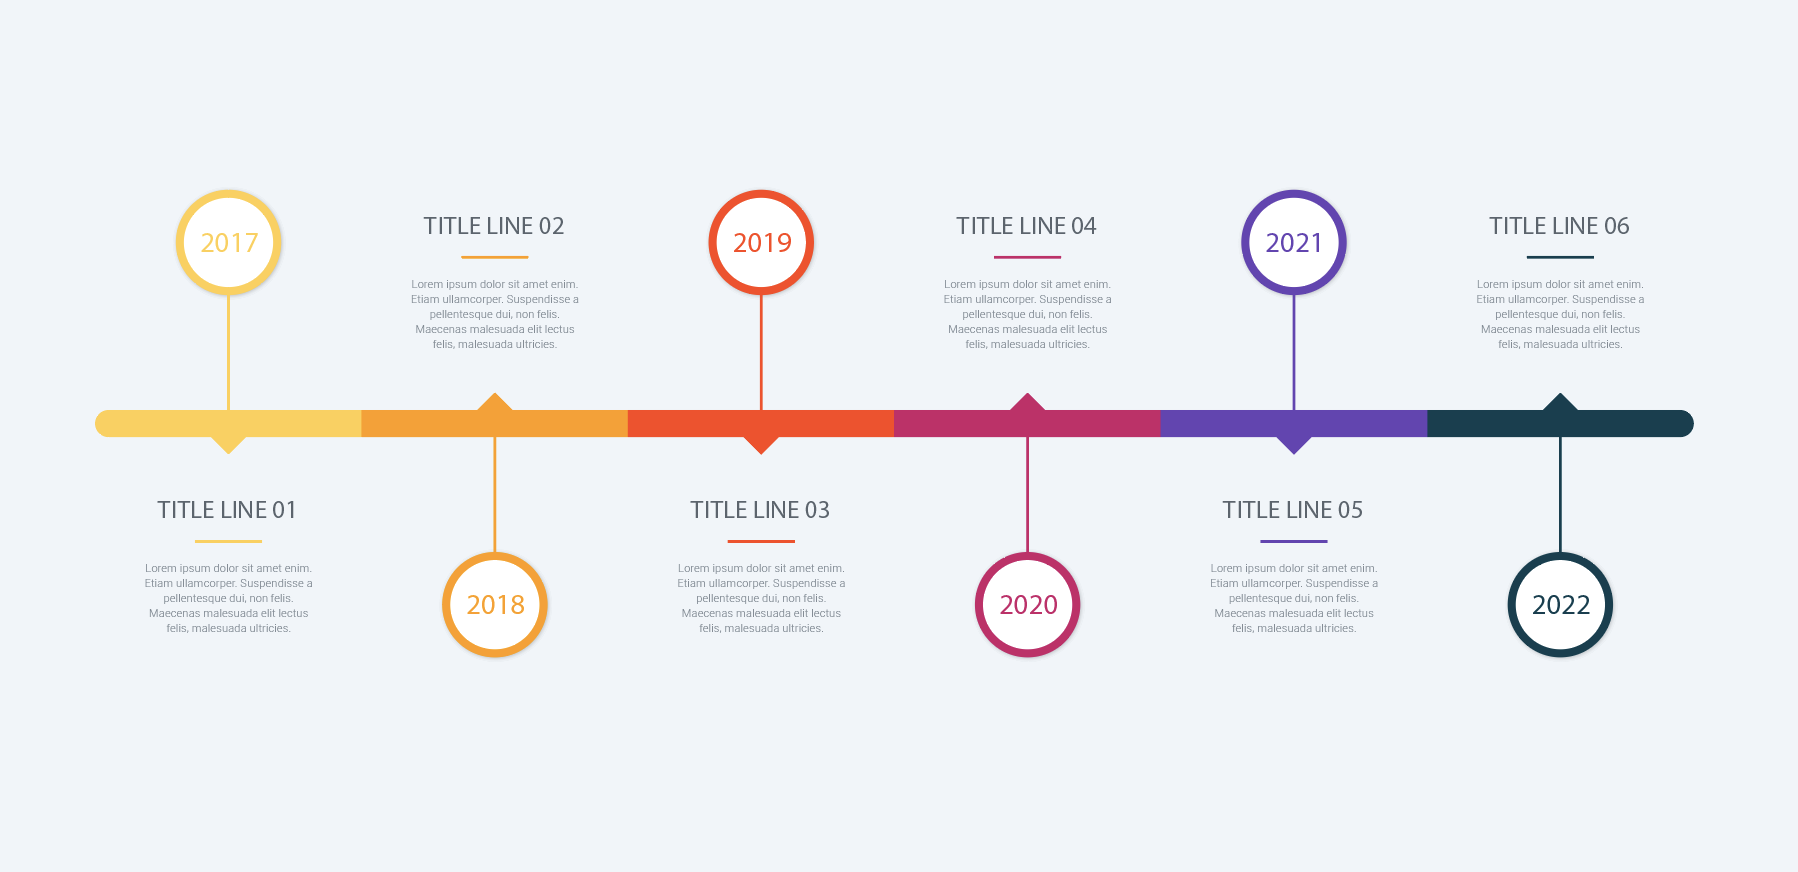 Picture This: Timeline Graphic Tools for Communication - North